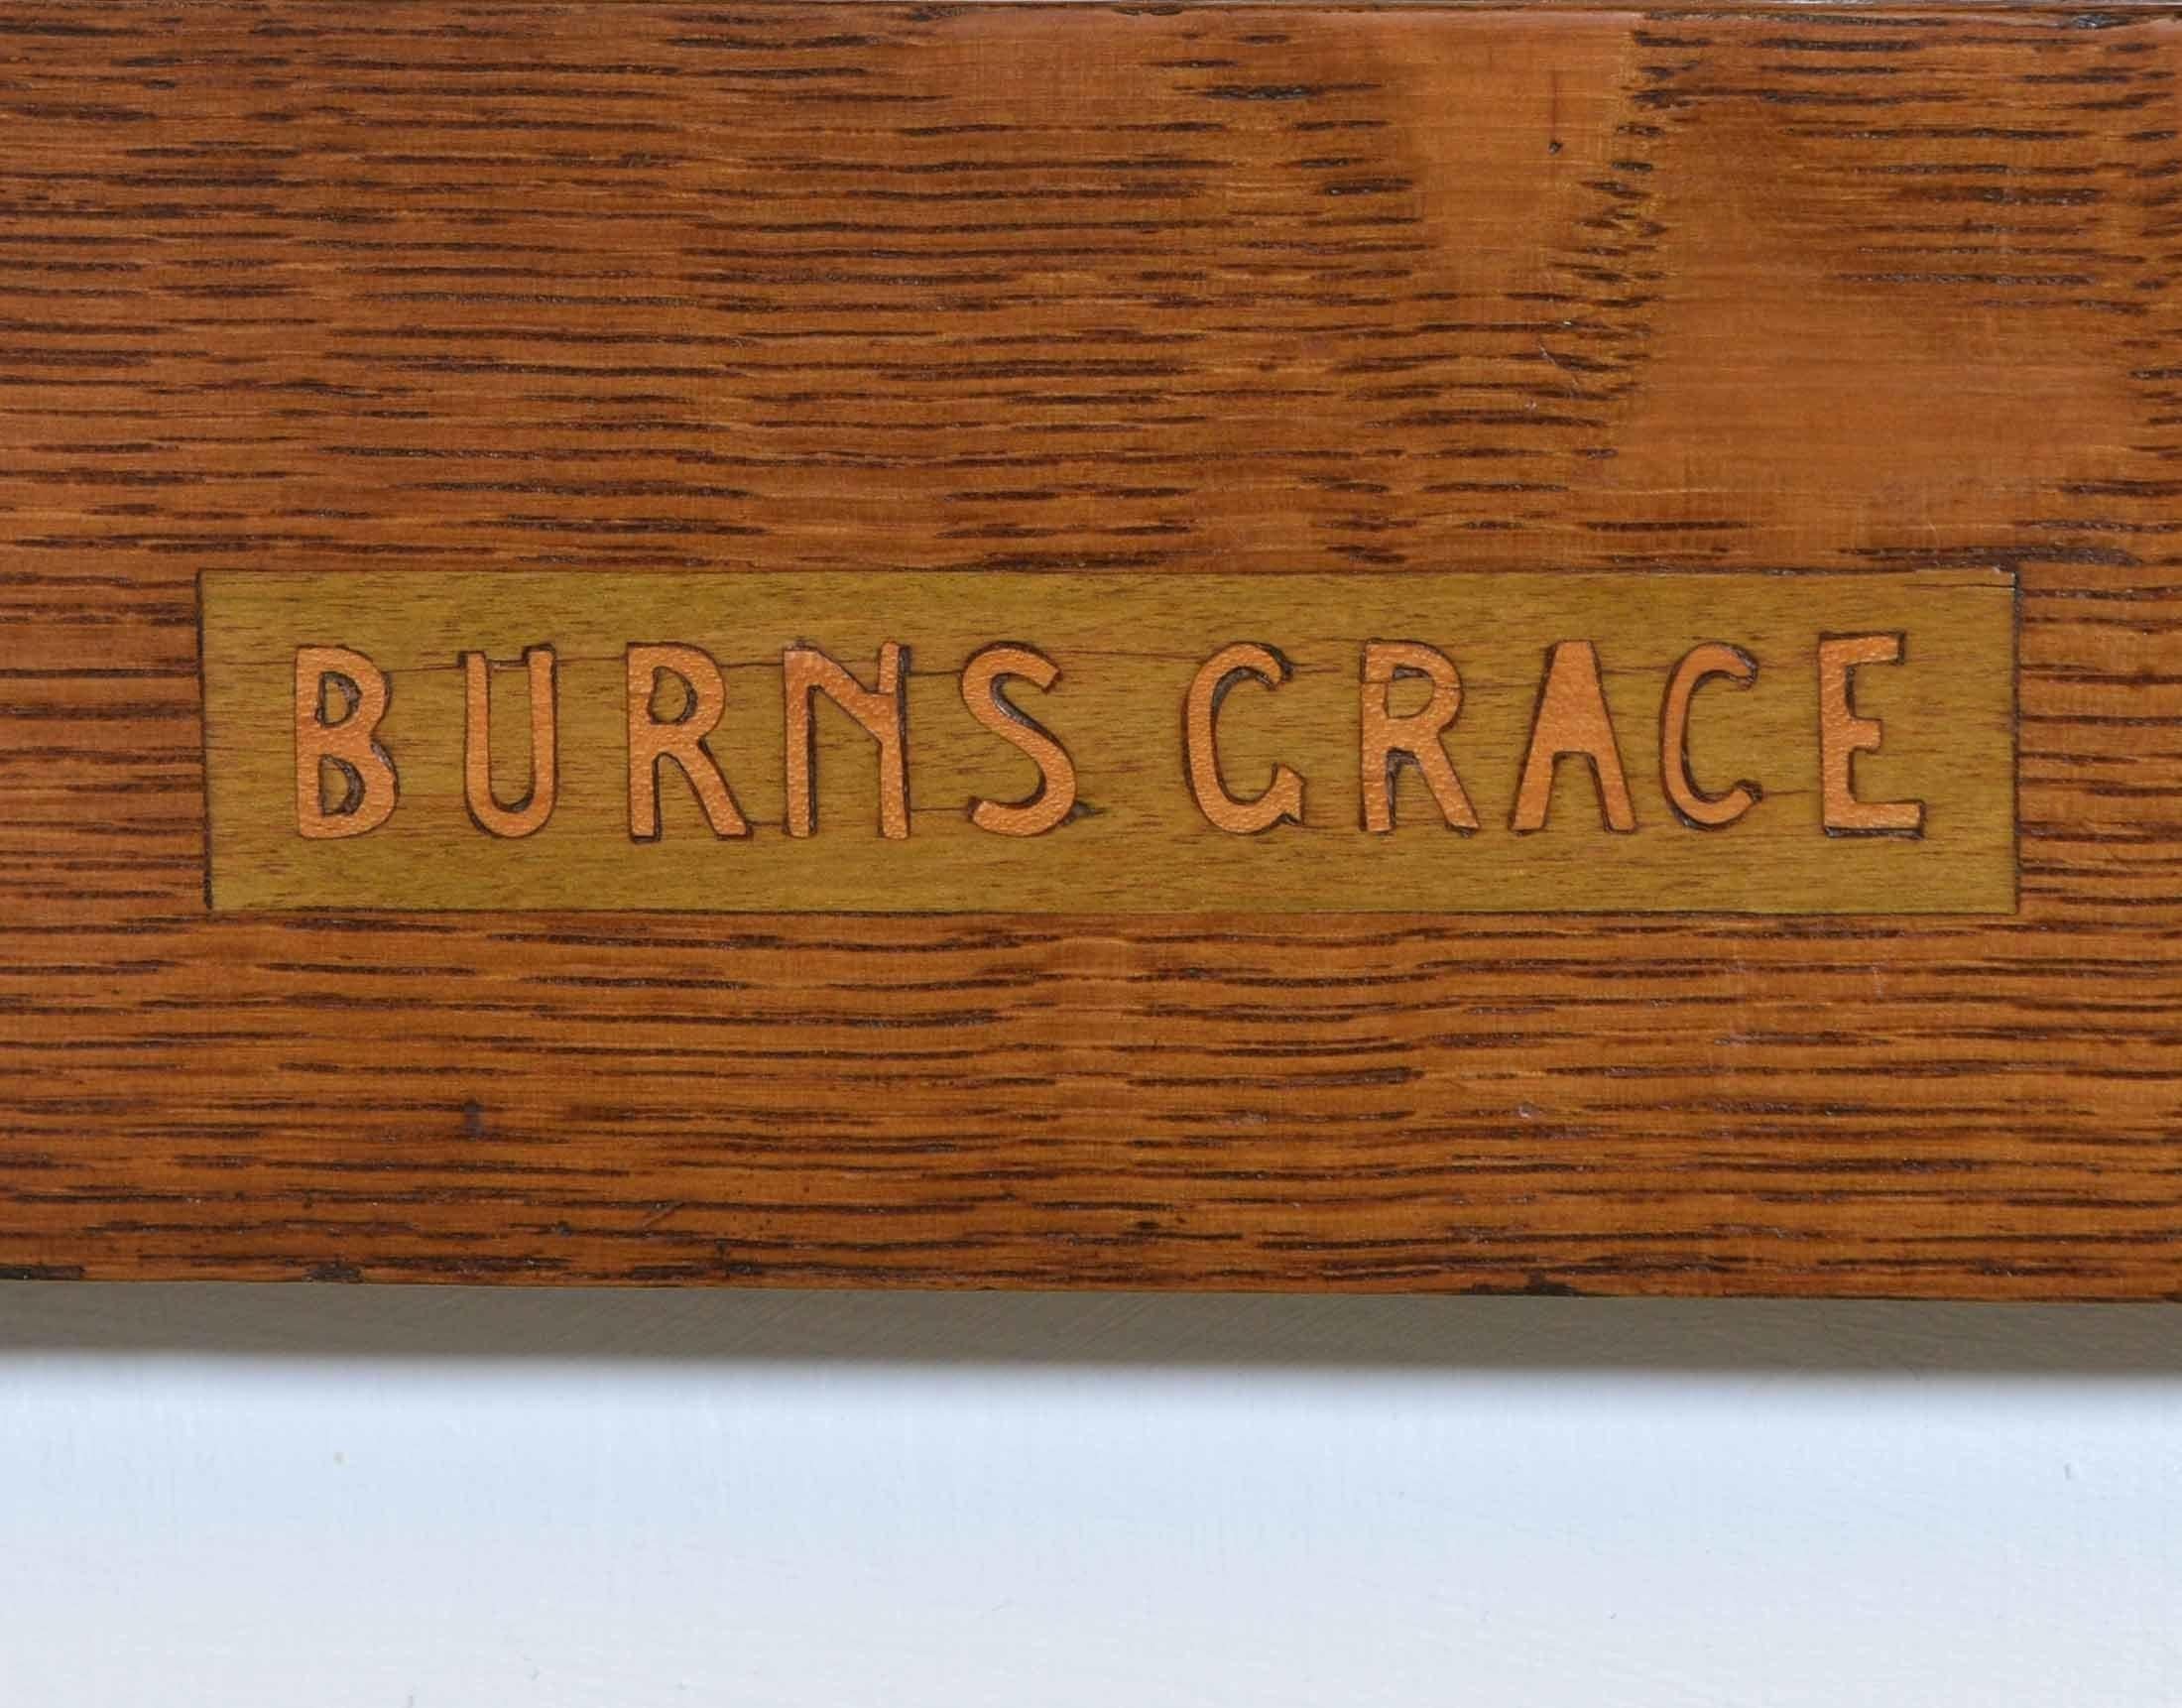 An Arts & Crafts oak wall mirror with Robert Burns incised motto and inlaid decoration. Circa 1910.

Burns Grace
'Some hae meat and canna eat
And some wad eat that want it
But we hae meat and we can eat
And sae the Lord be thankit.'

The bevelled